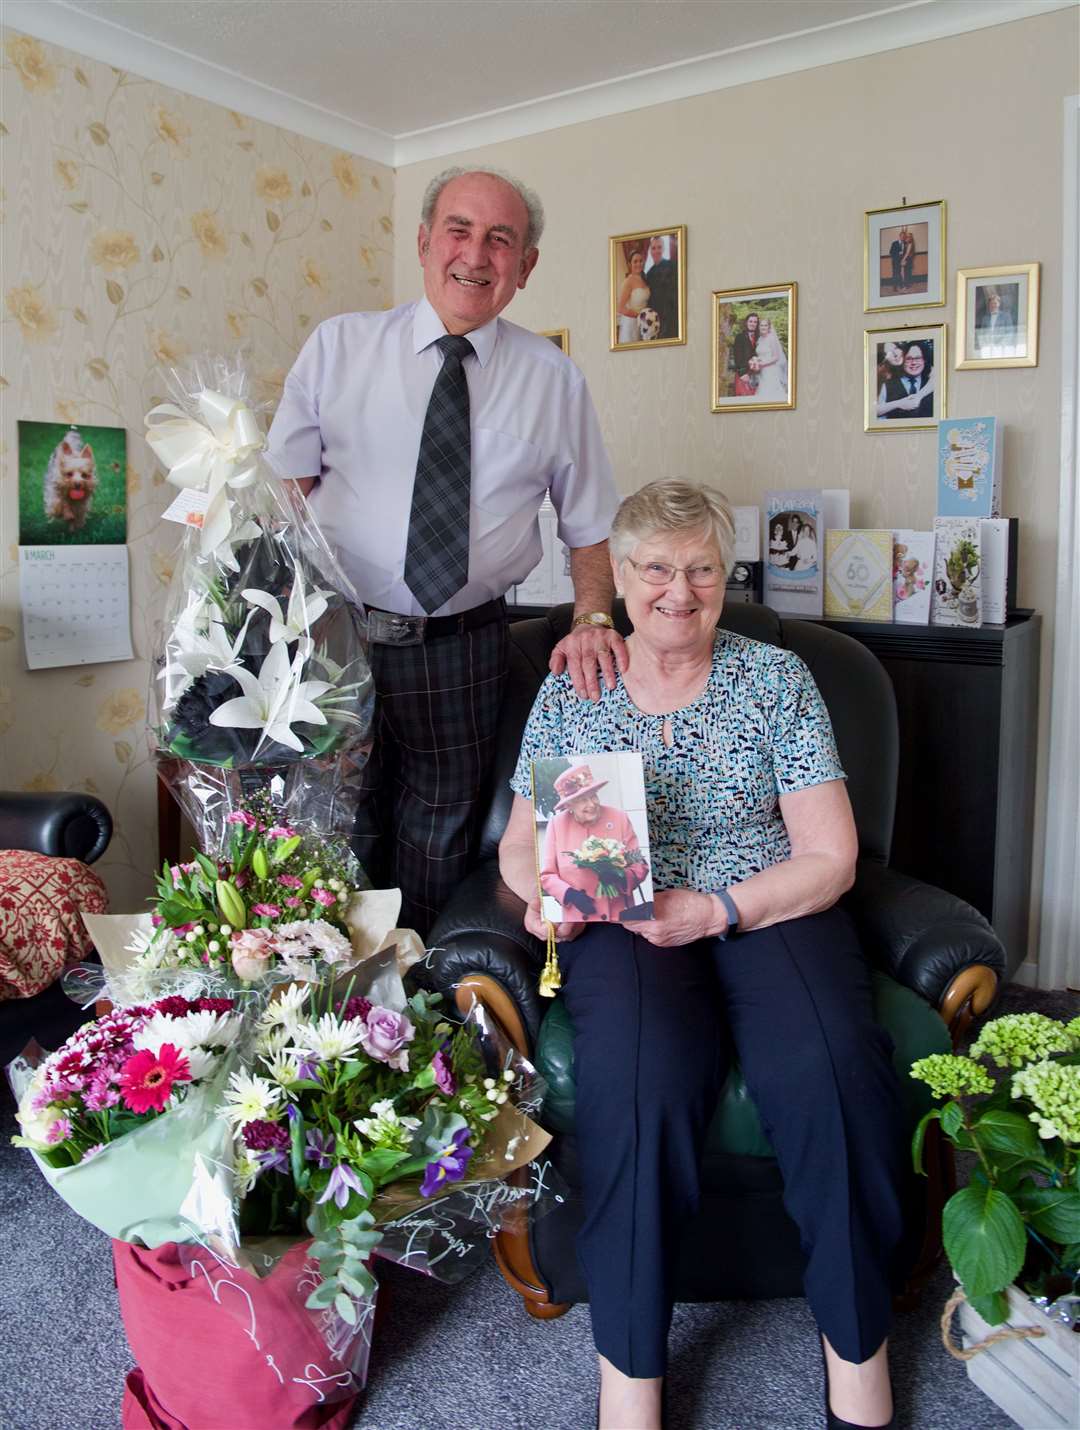 The diamond couple, Walter and Sylvia Gill, were overwhelmed with the love shown to them by friends and family on their anniversary. Picture: Phil Harman